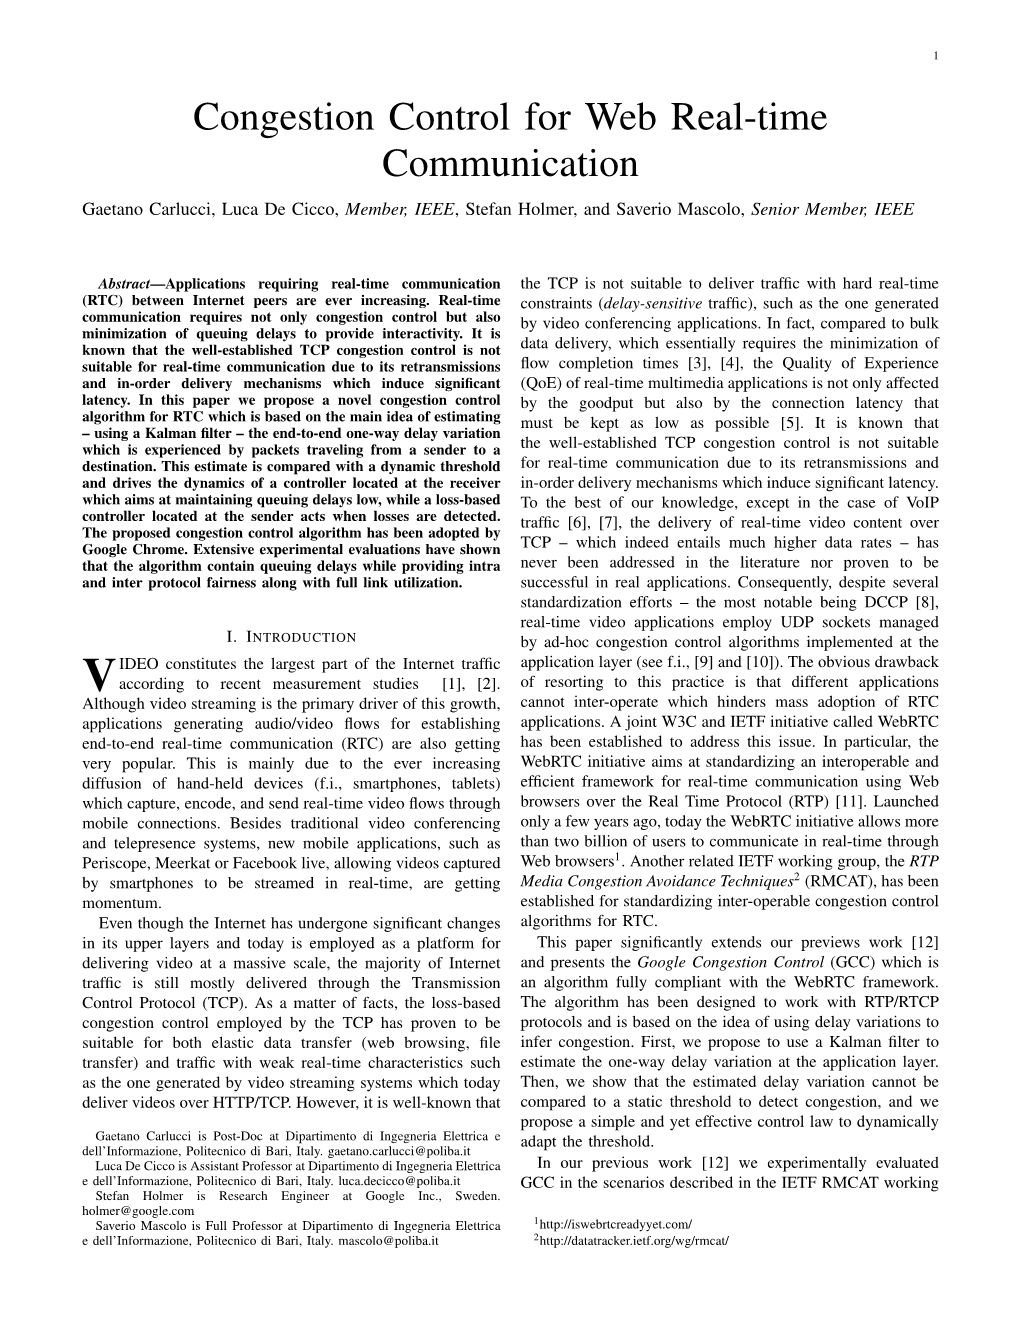 Congestion Control for Web Real-Time Communication Gaetano Carlucci, Luca De Cicco, Member, IEEE, Stefan Holmer, and Saverio Mascolo, Senior Member, IEEE